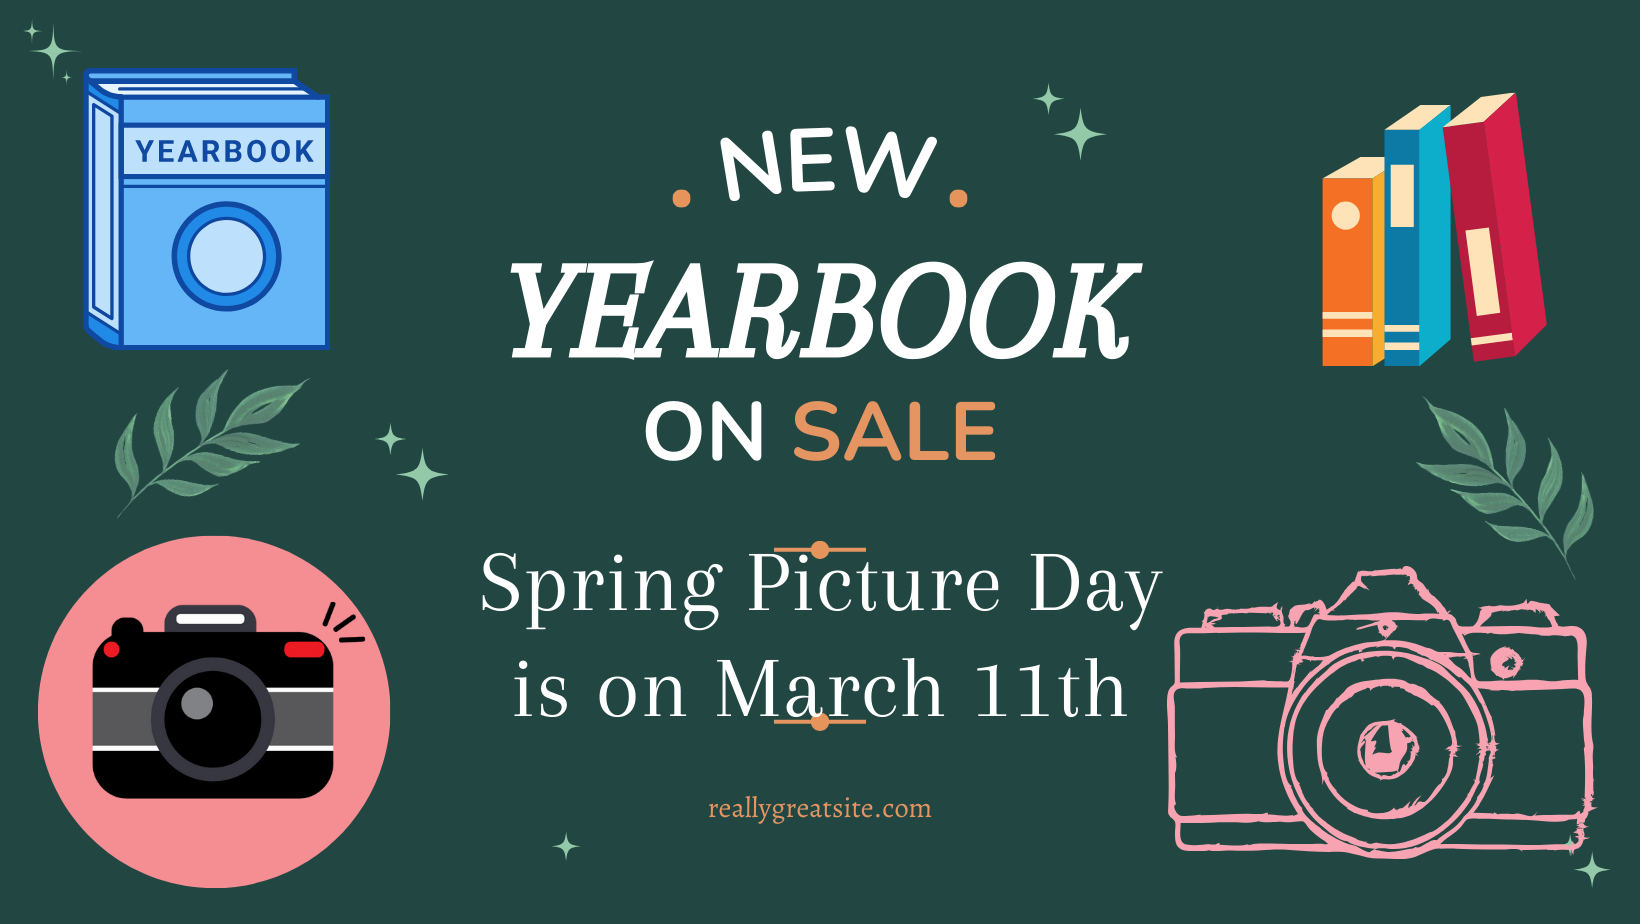 Year book on sale; Spring picture day is March 11. Yearbook pictures and camera picture